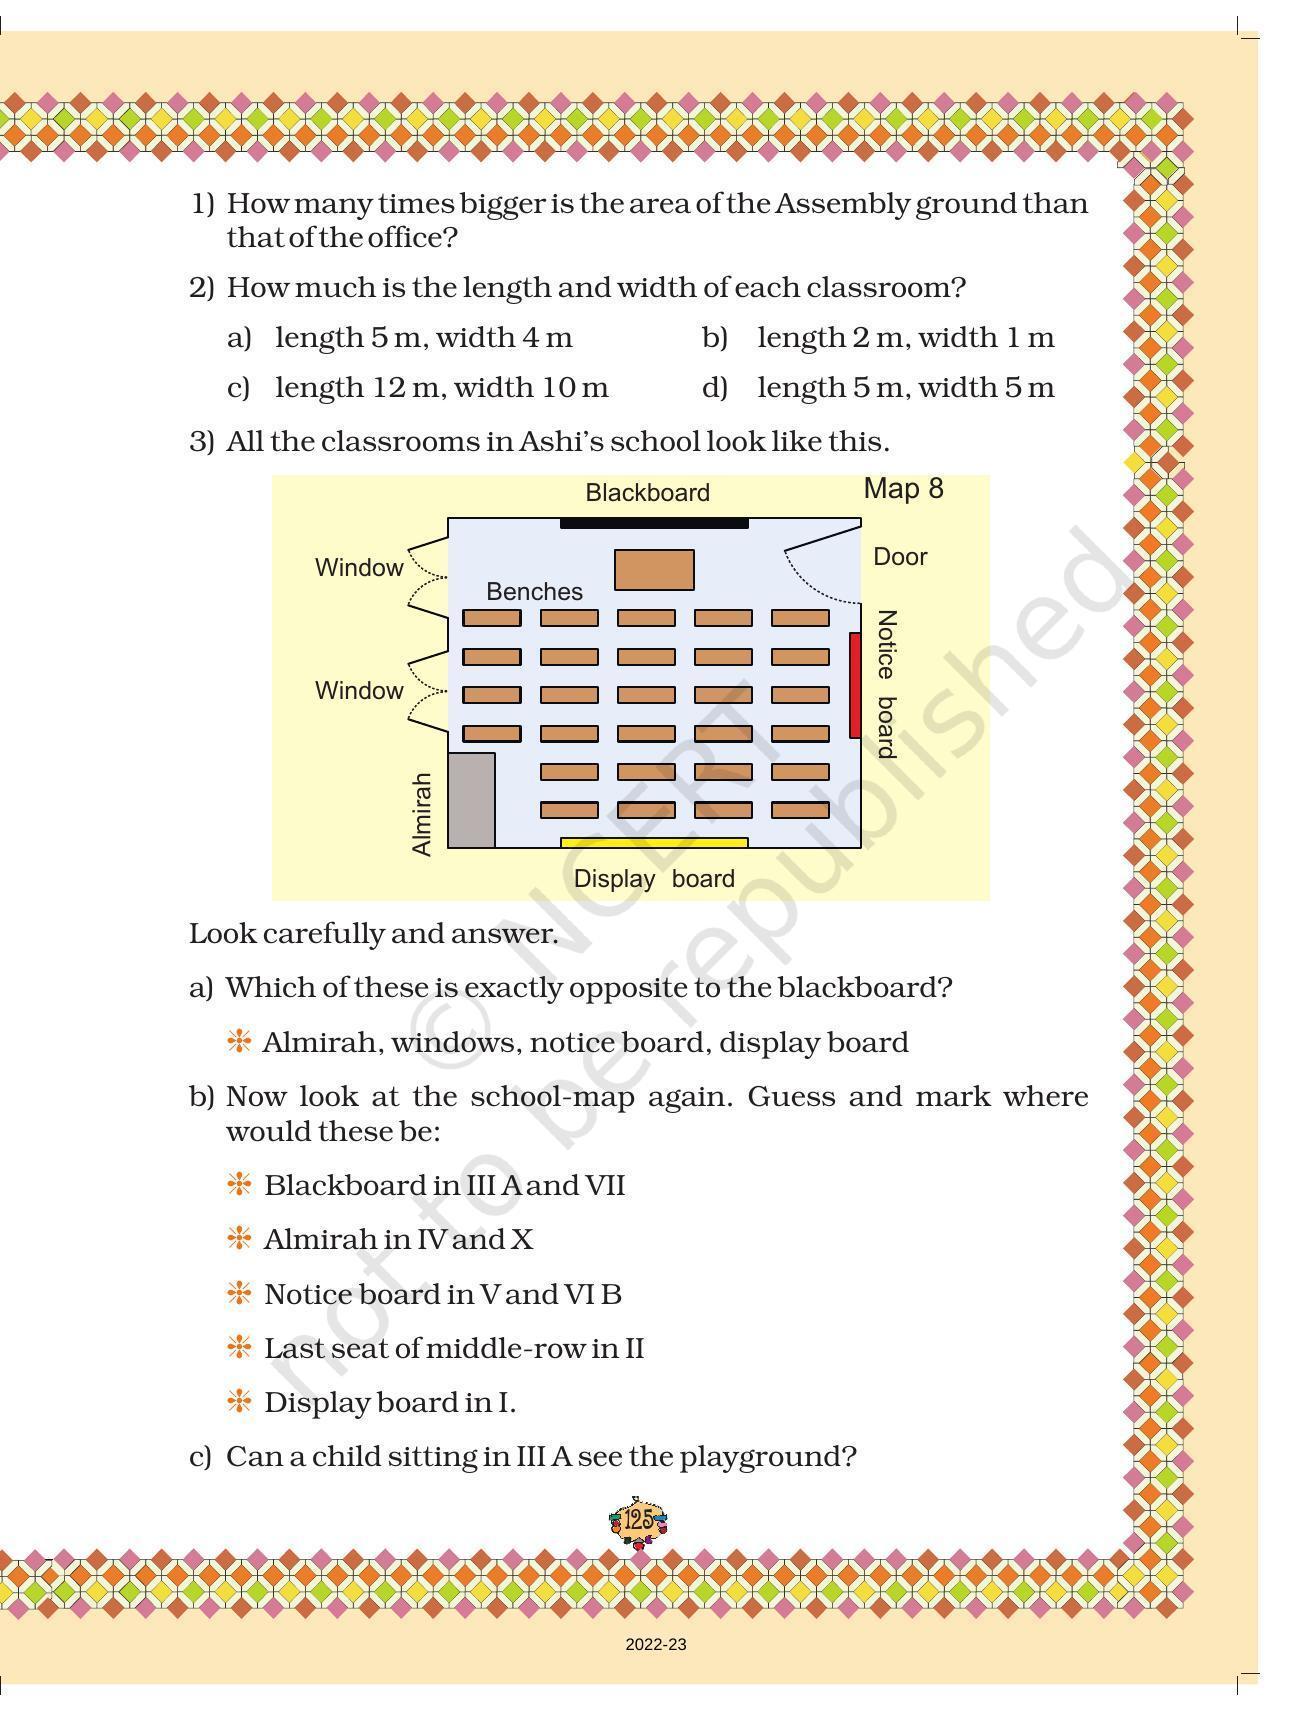 NCERT Book for Class 5 Maths Chapter 8 Mapping Your Way - Page 14